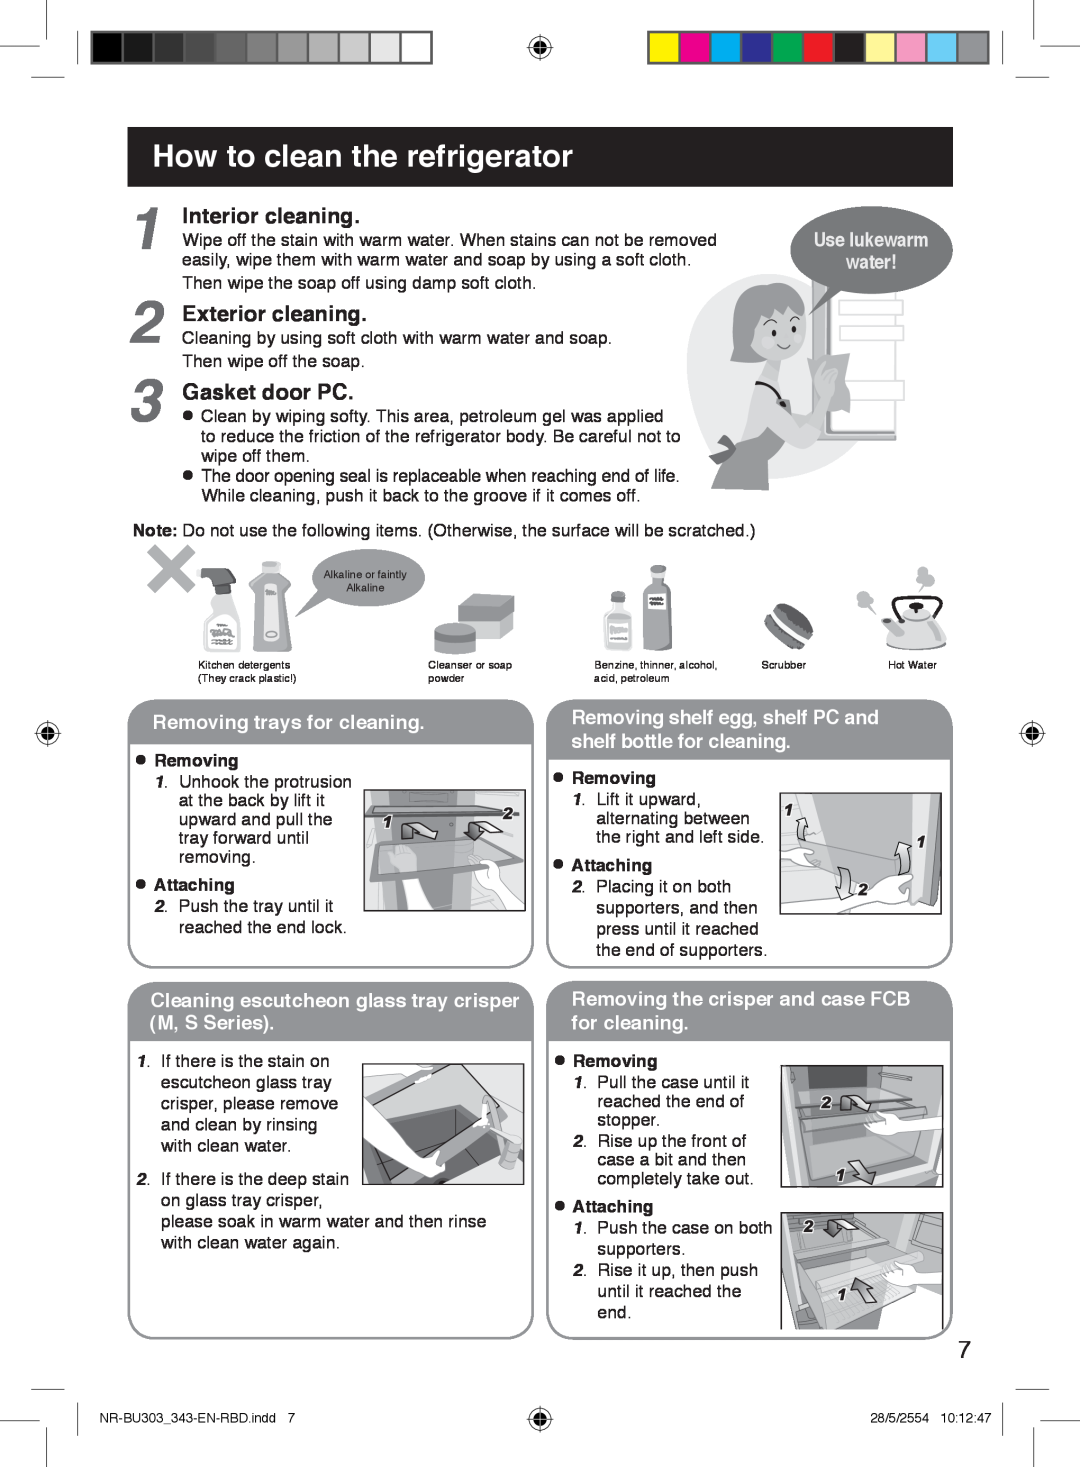 Panasonic NR-BU343 How to clean the refrigerator, Removing trays for cleaning, Removing shelf egg, shelf PC and, Removing 